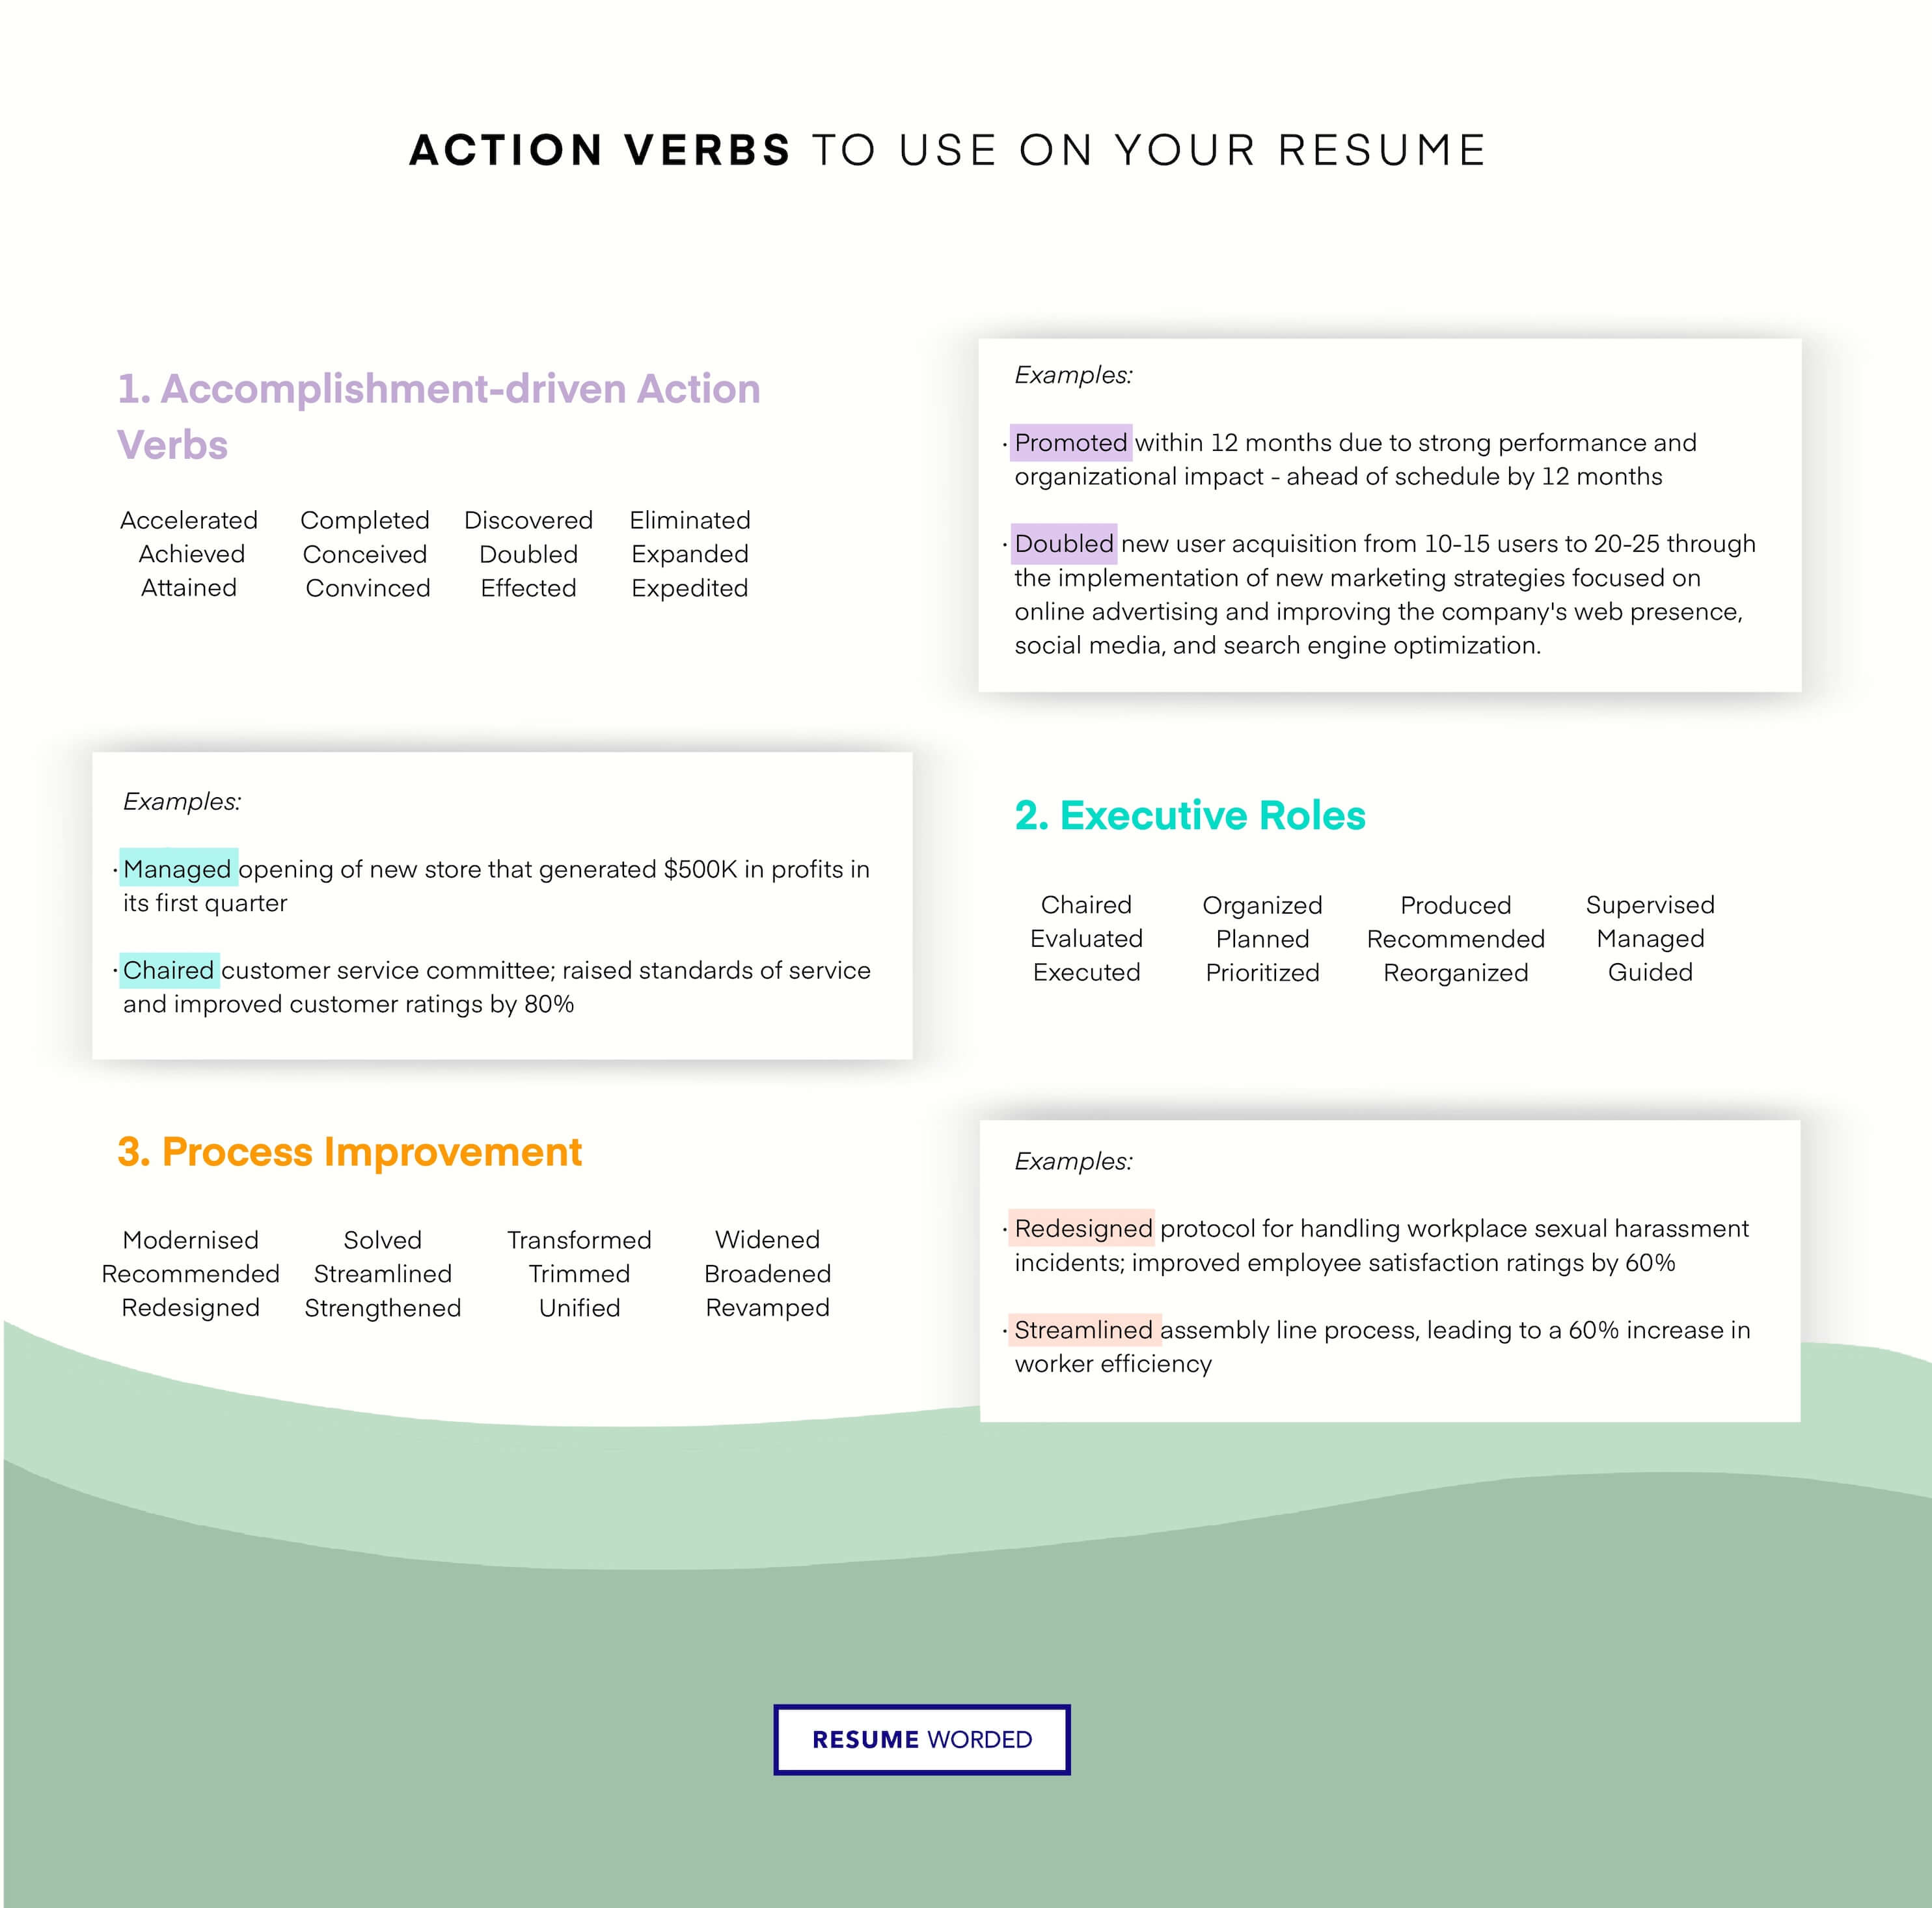 Use action verbs that indicate your leadership. - Senior Finance Executive Resume